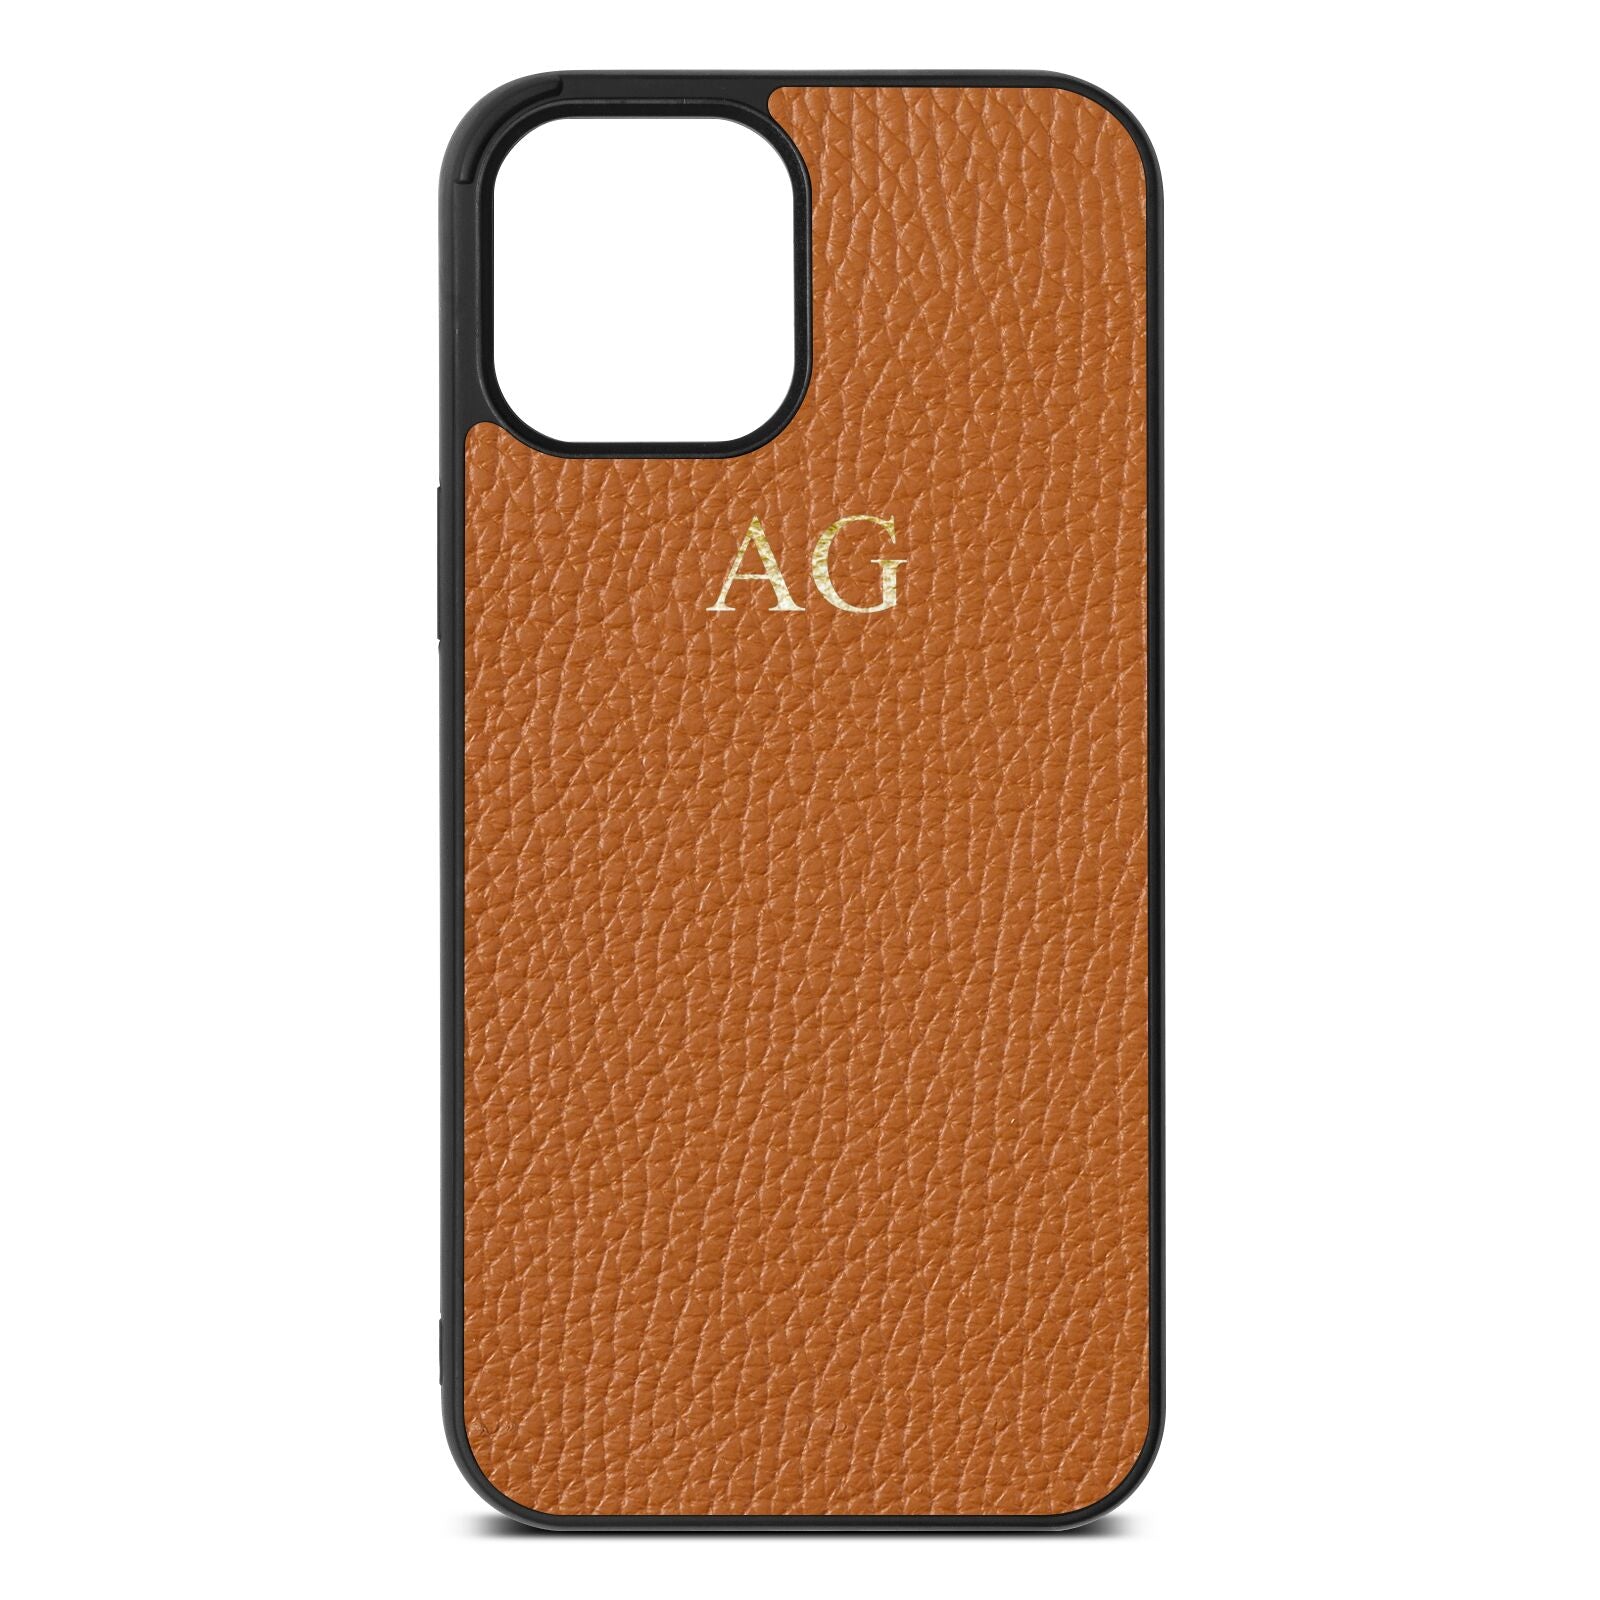 Personalised Tan Pebble Leather iPhone 12 Pro Max Case